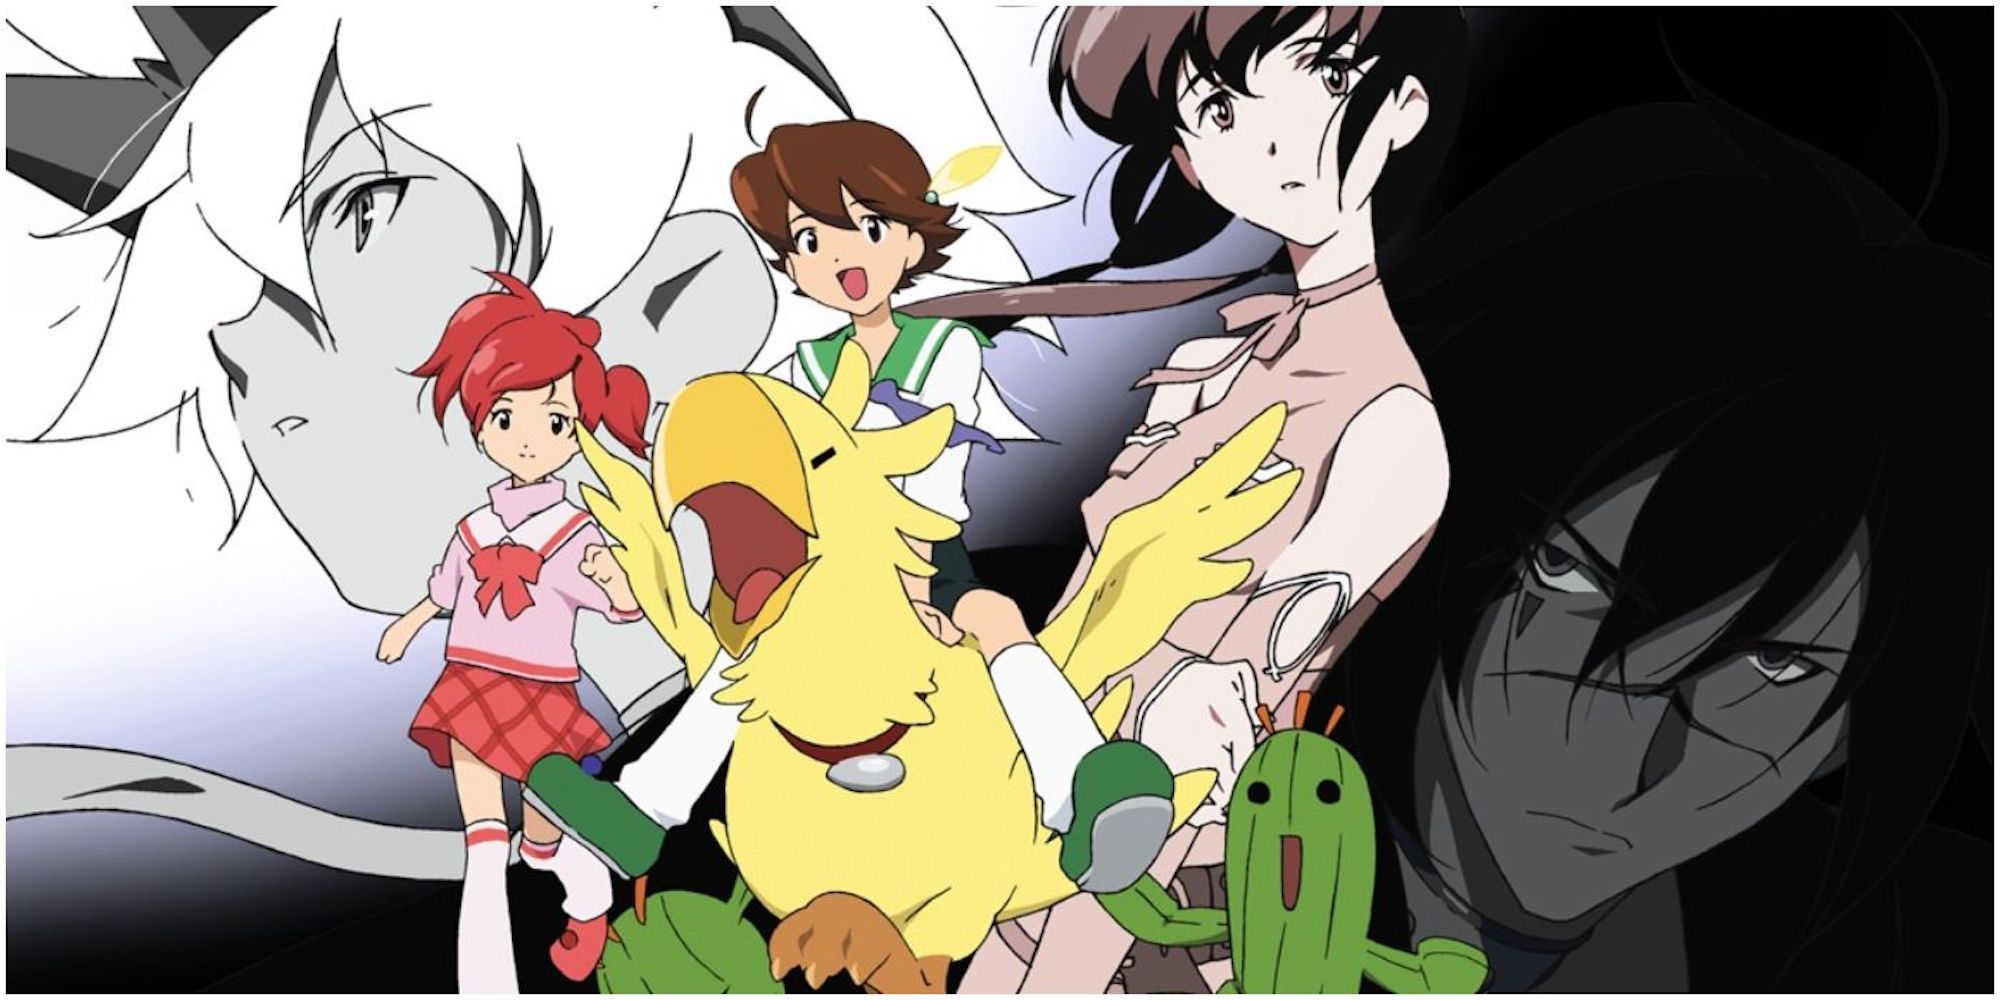 Promo art featuring characters from Final Fantasy: Unlimited